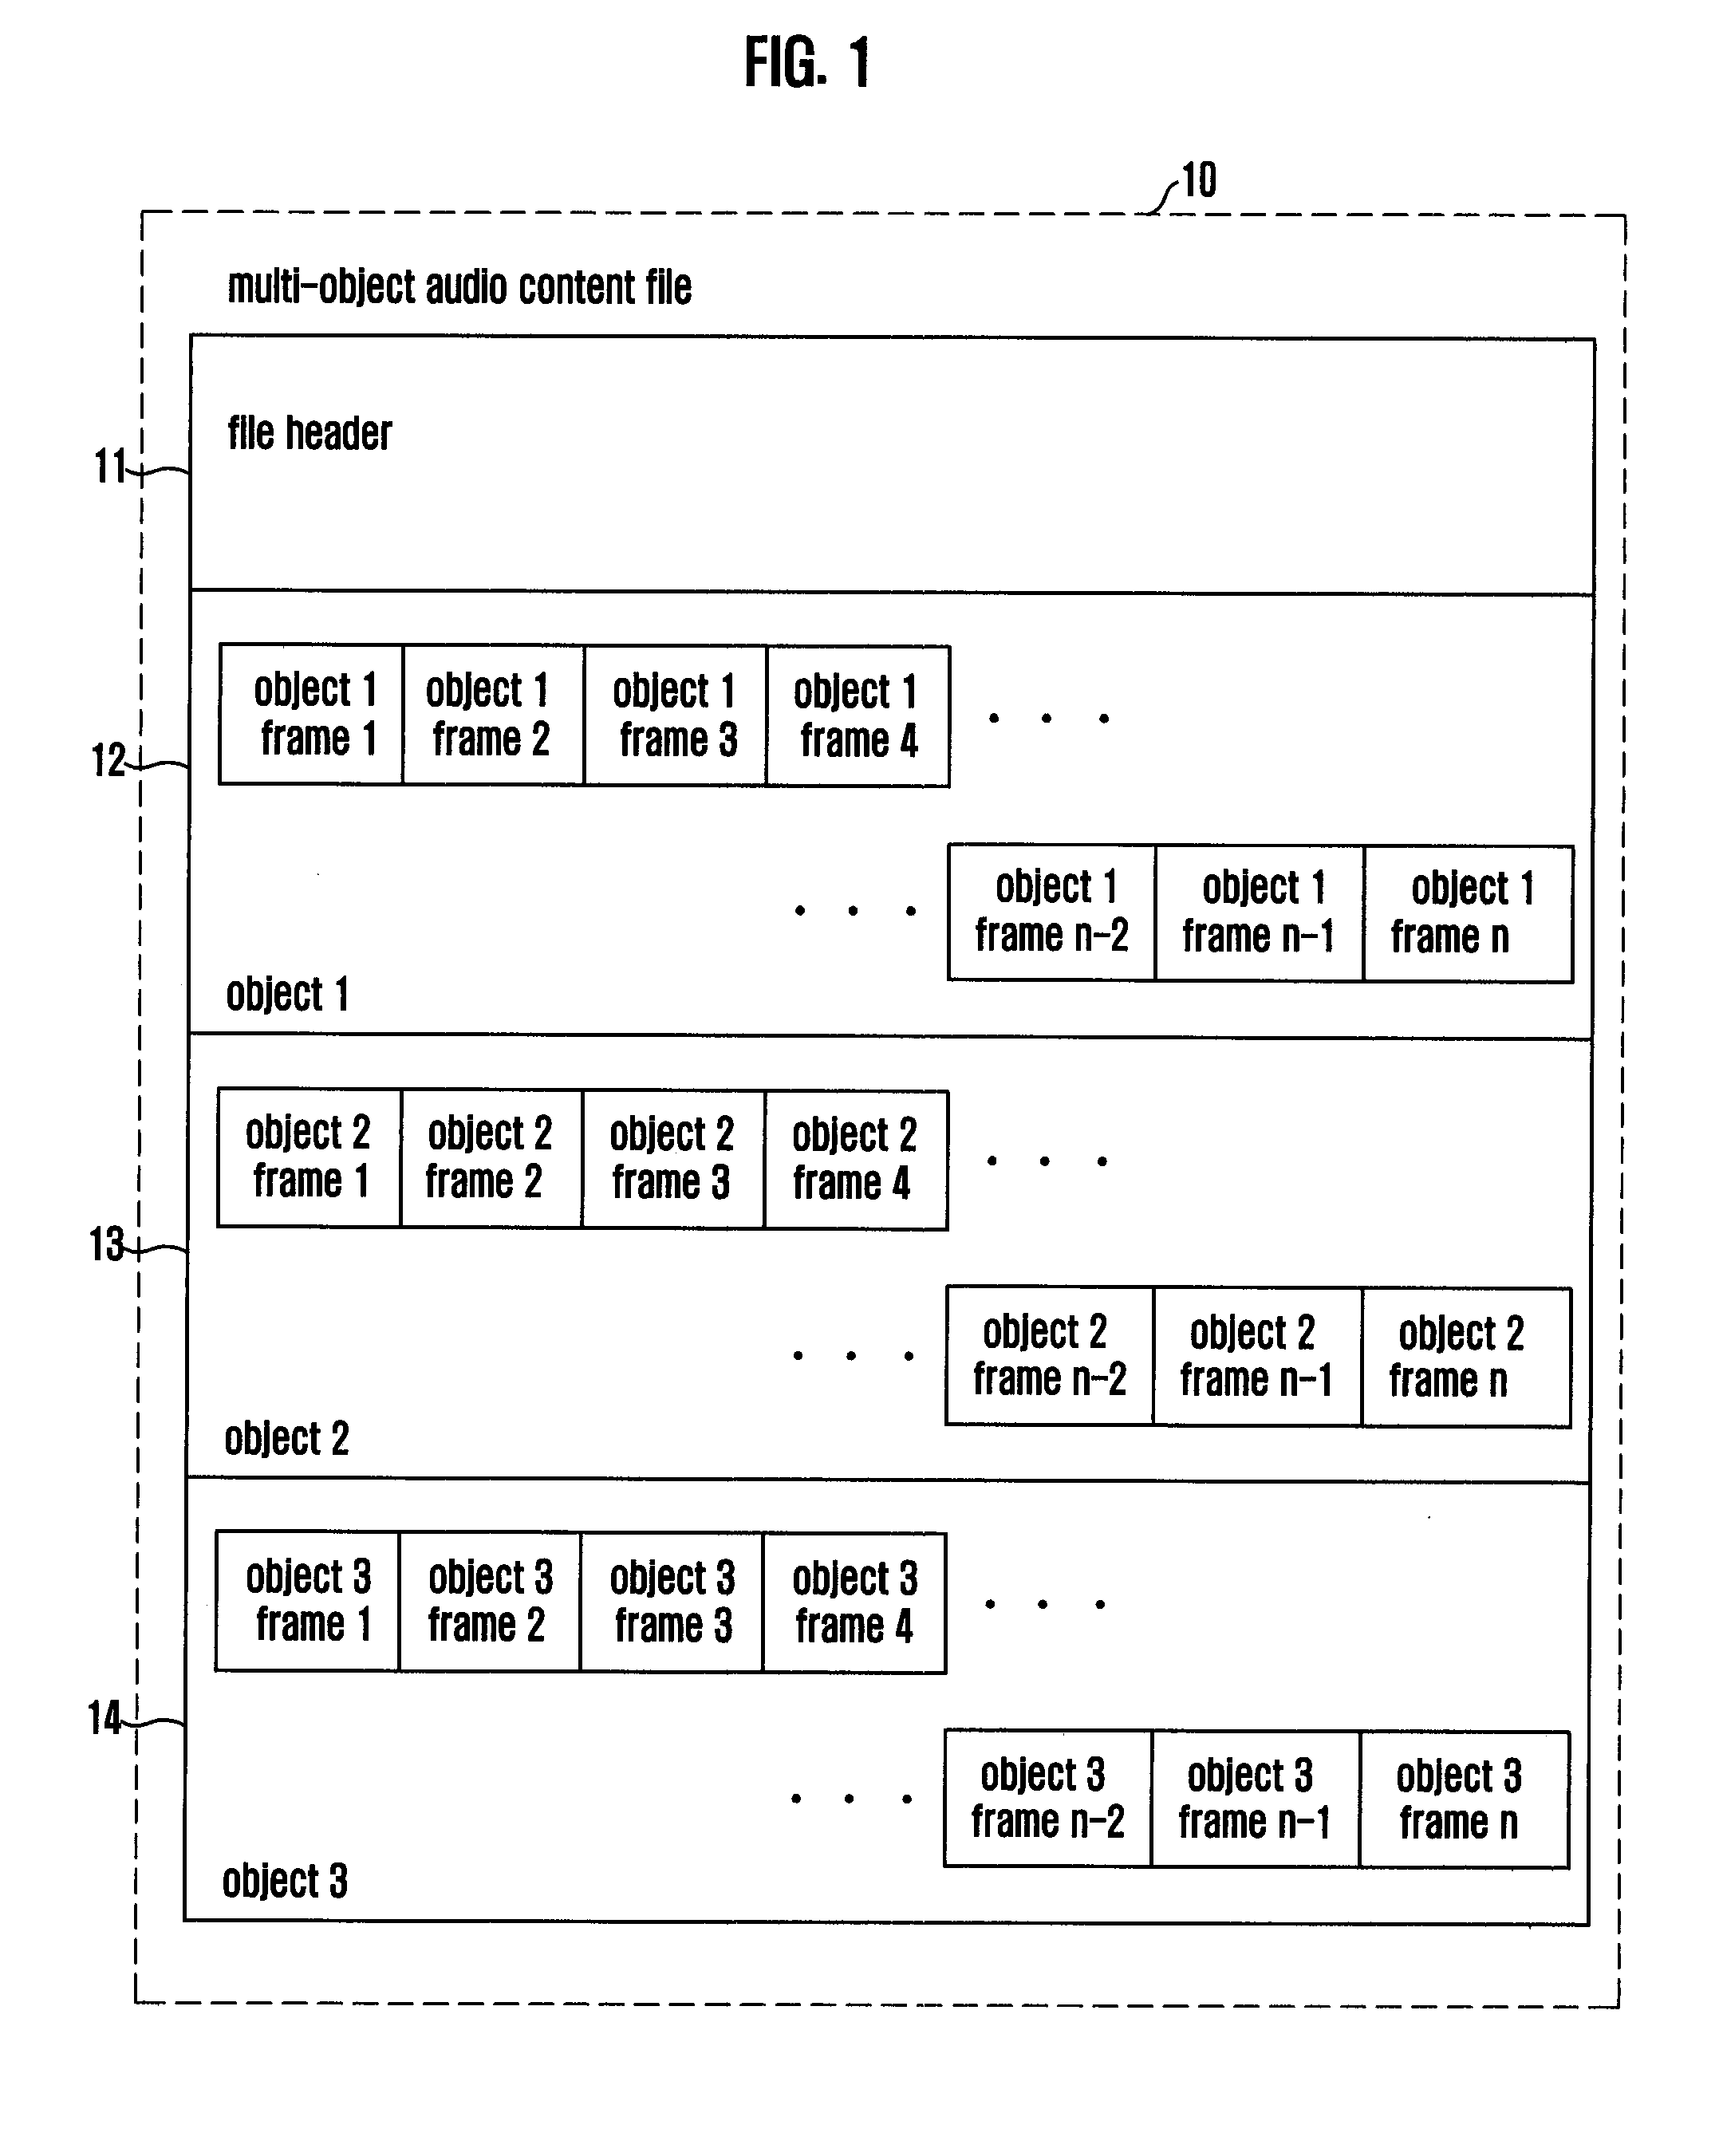 Method for creating, editing, and reproducing multi-object audio contents files for object-based audio service, and method for creating audio presets